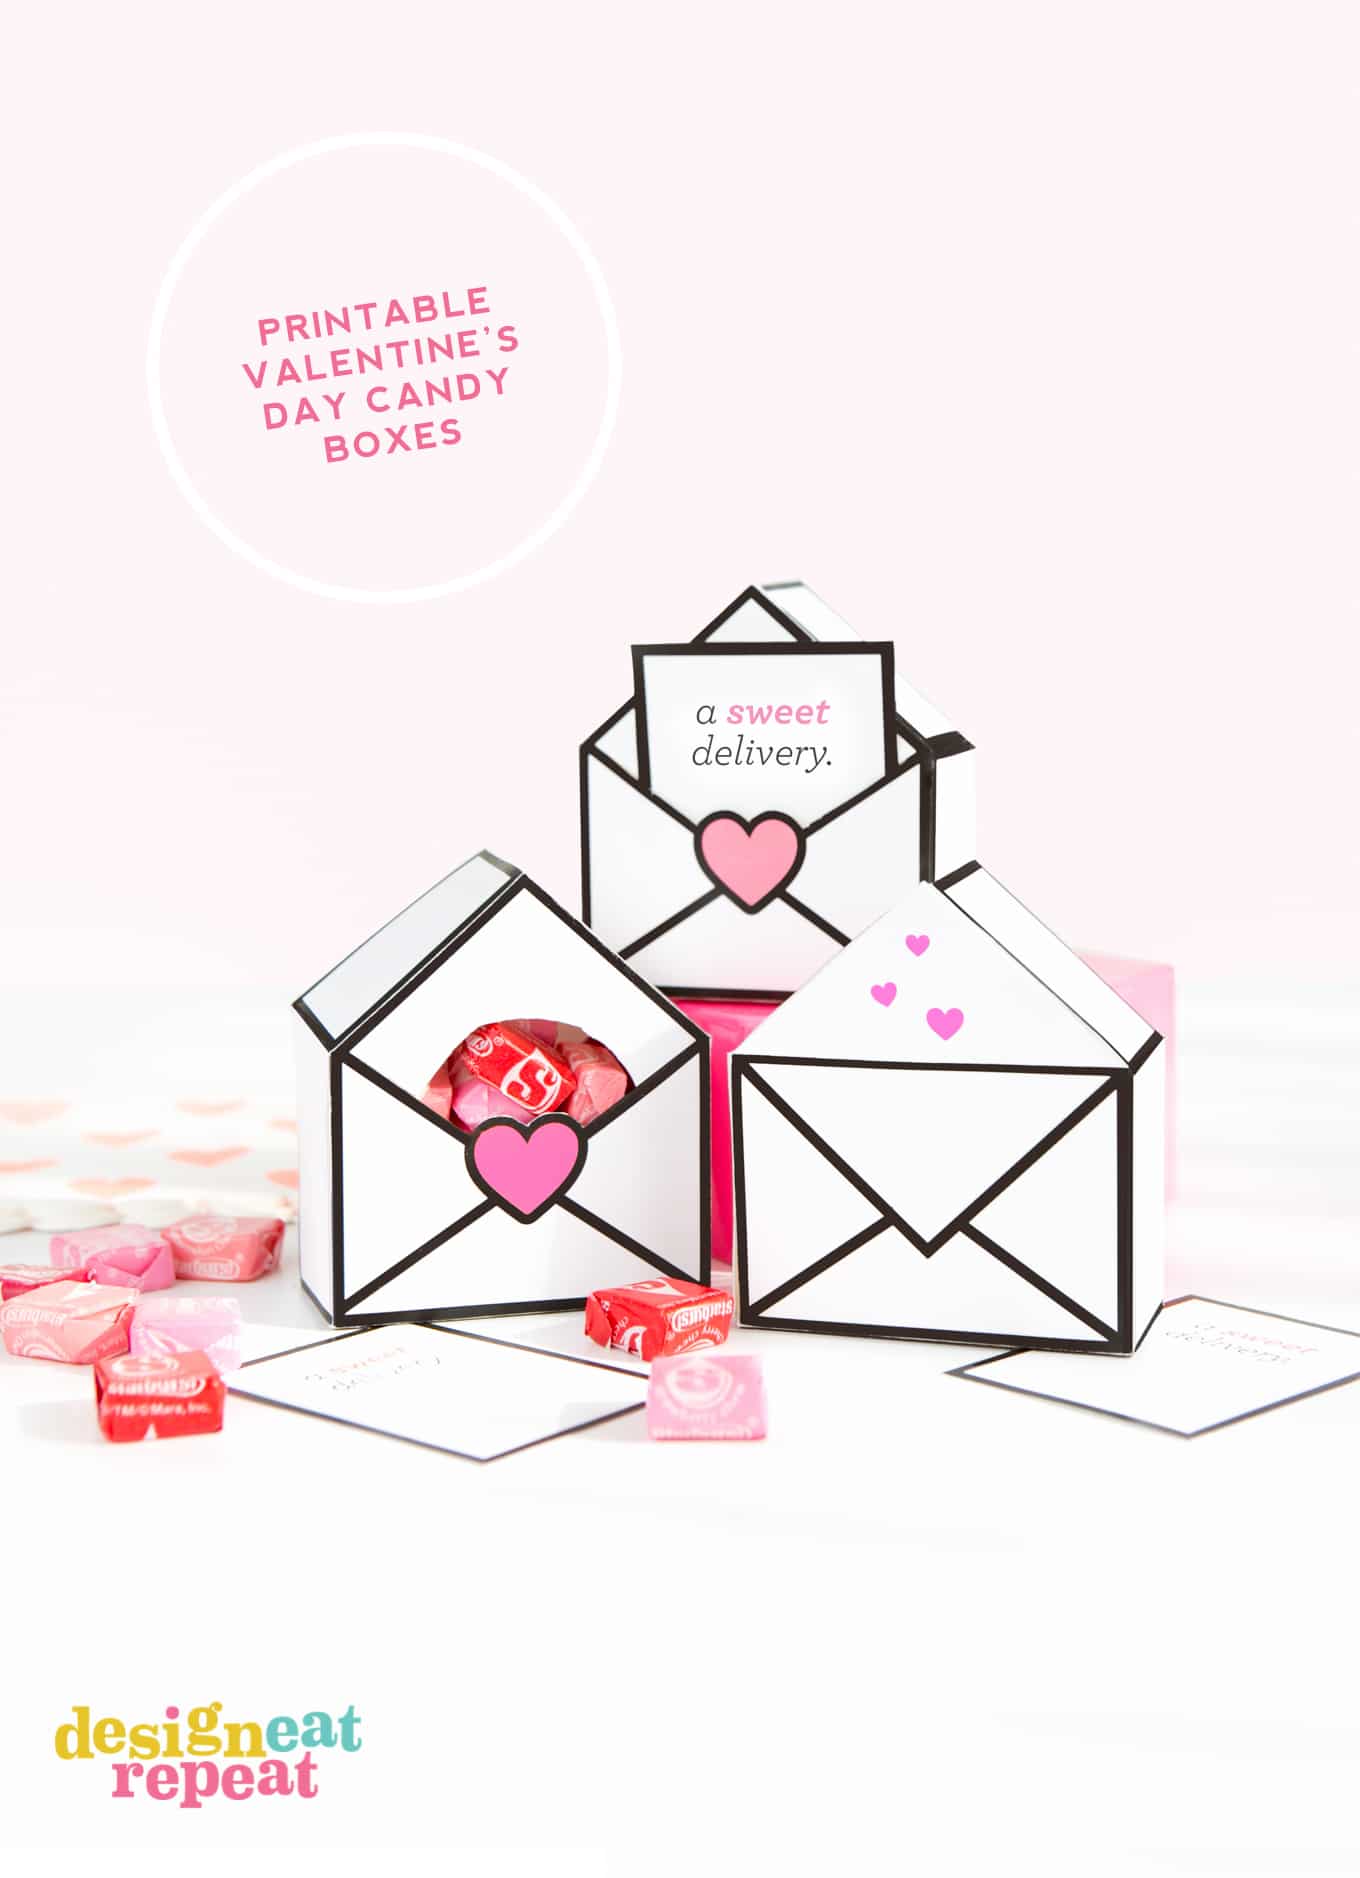 Fun & interactive printable Valentines gift boxes - free to download and perfect for candy!